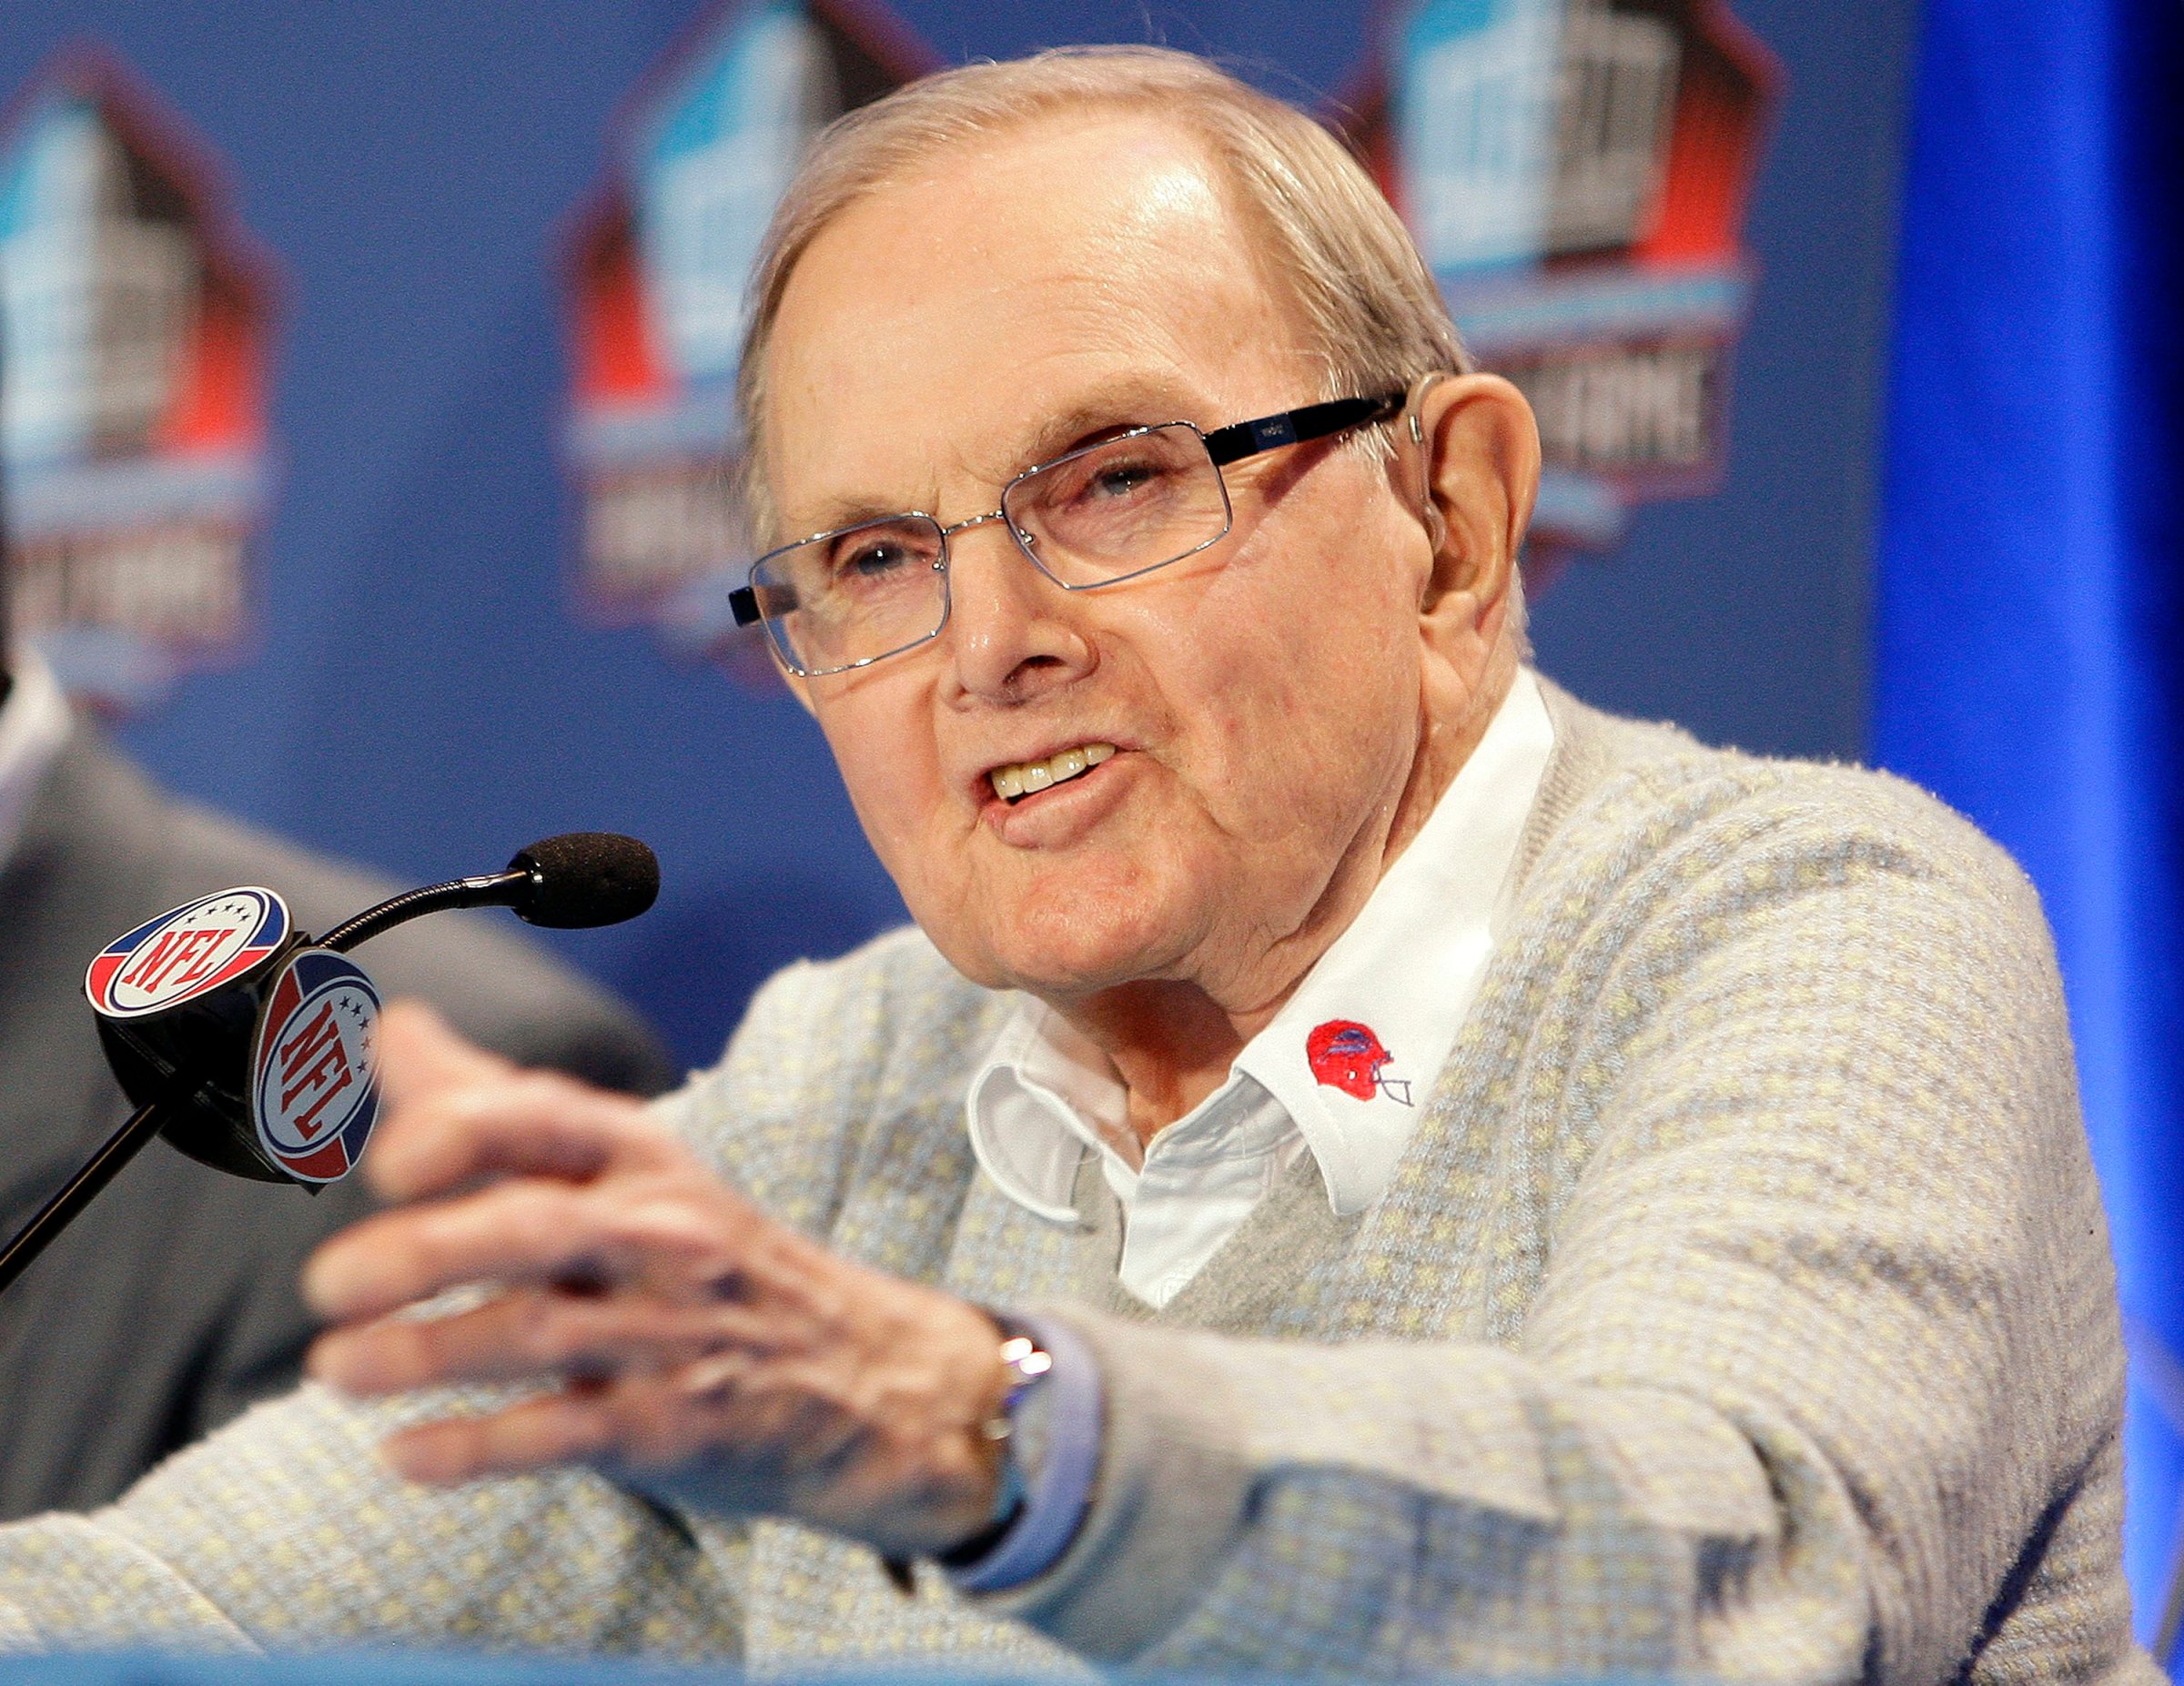 Buffalo Bills owner Ralph Wilson gestures during a news conference in Tampa, Fla. on Jan. 31, 2009.